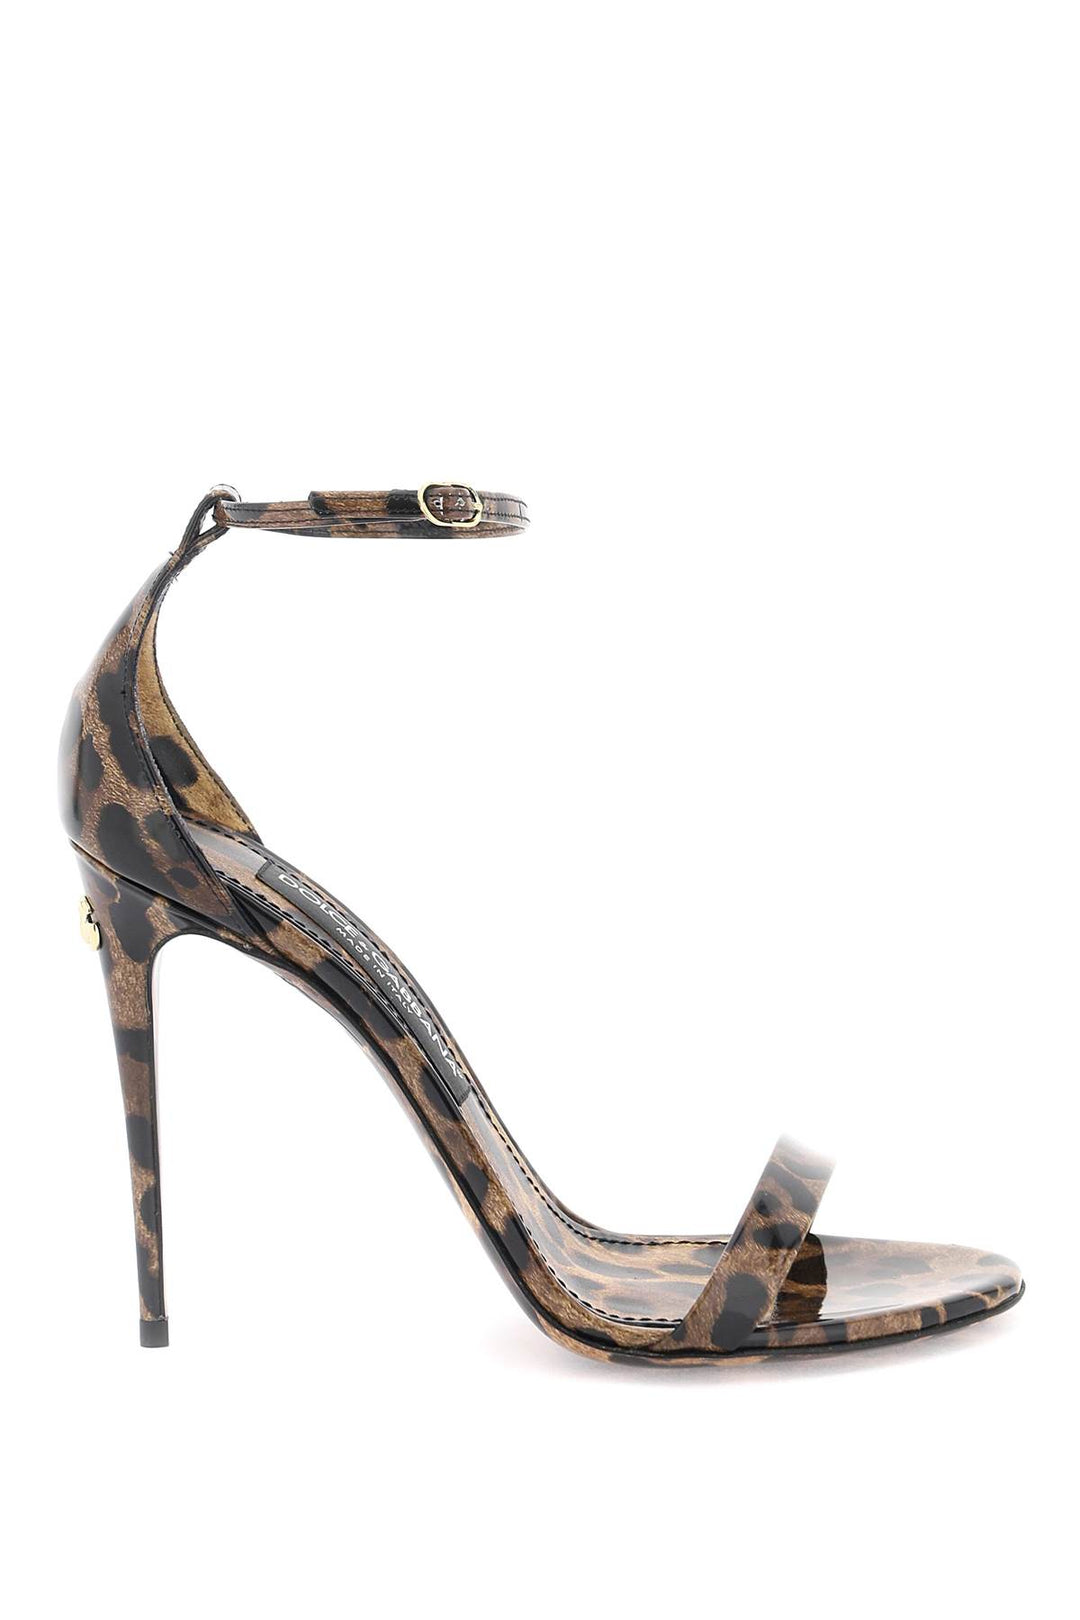 Dolce & Gabbana Leopard Print Glossy Leather Sandals   Brown